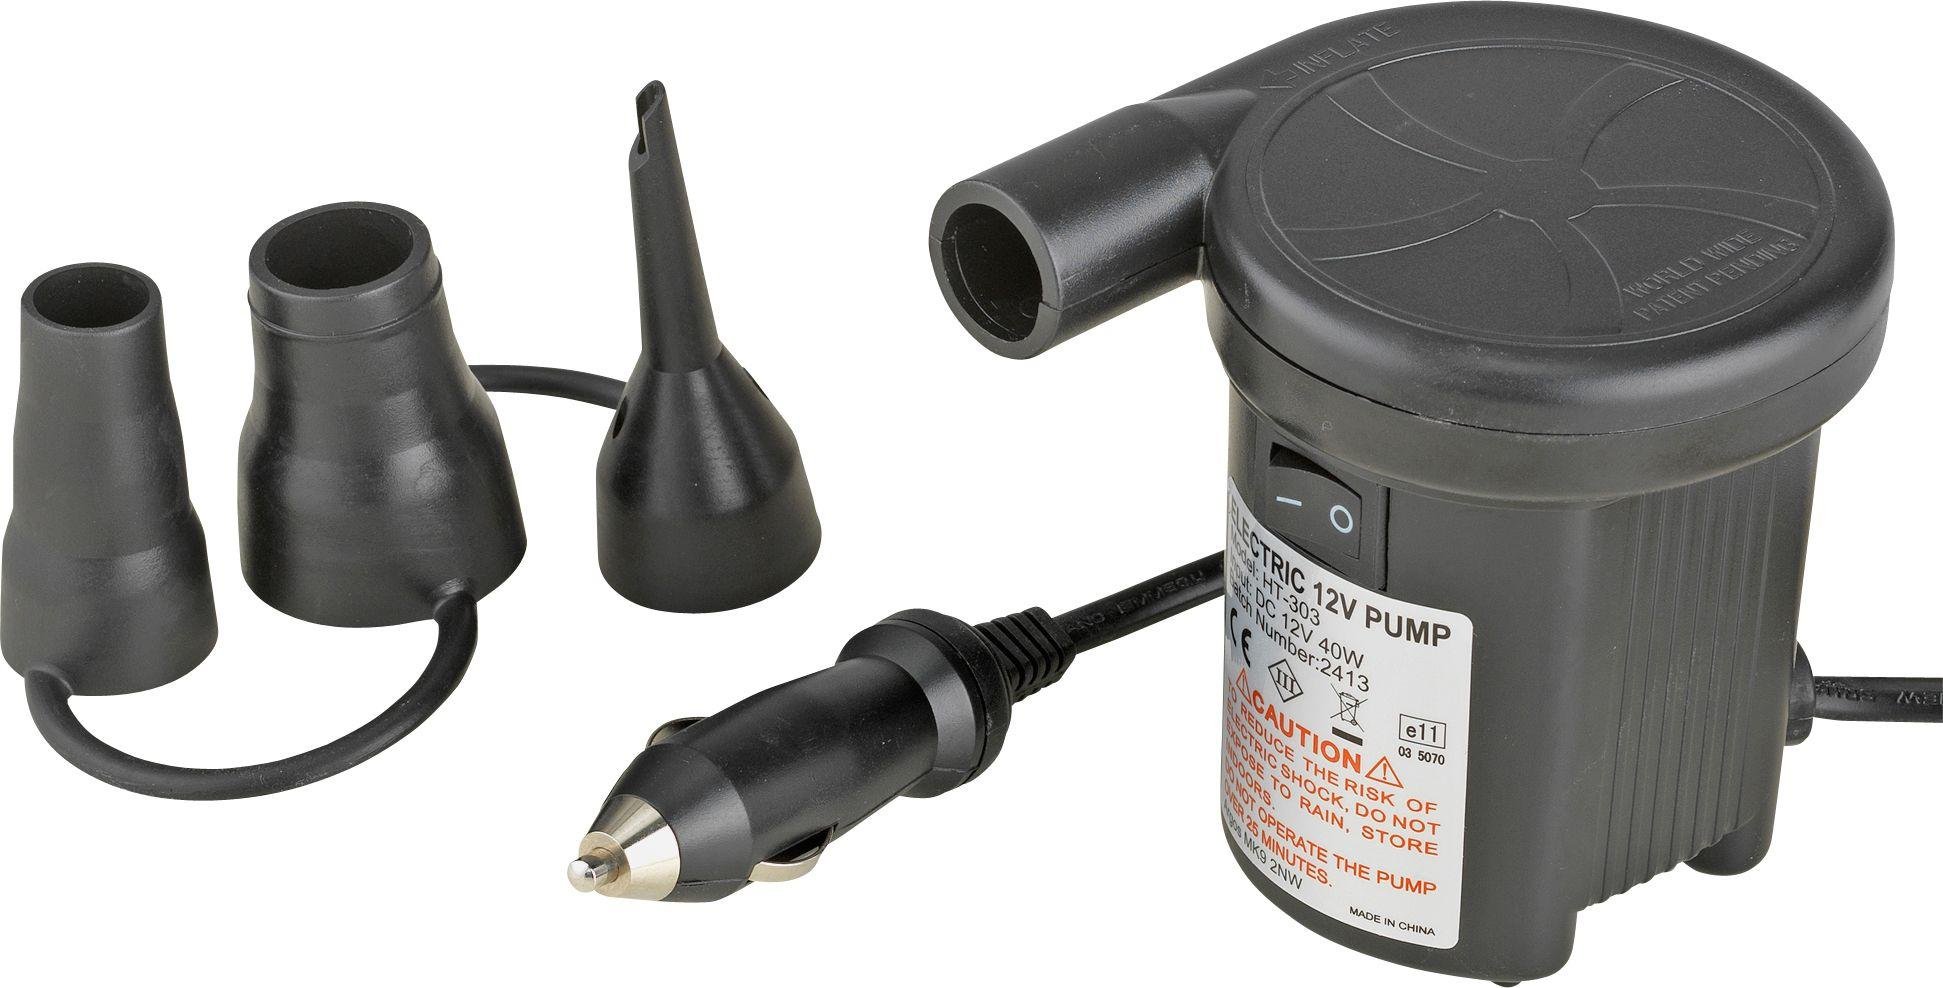 Electric 12V Car Charger Portable Air Pump Review